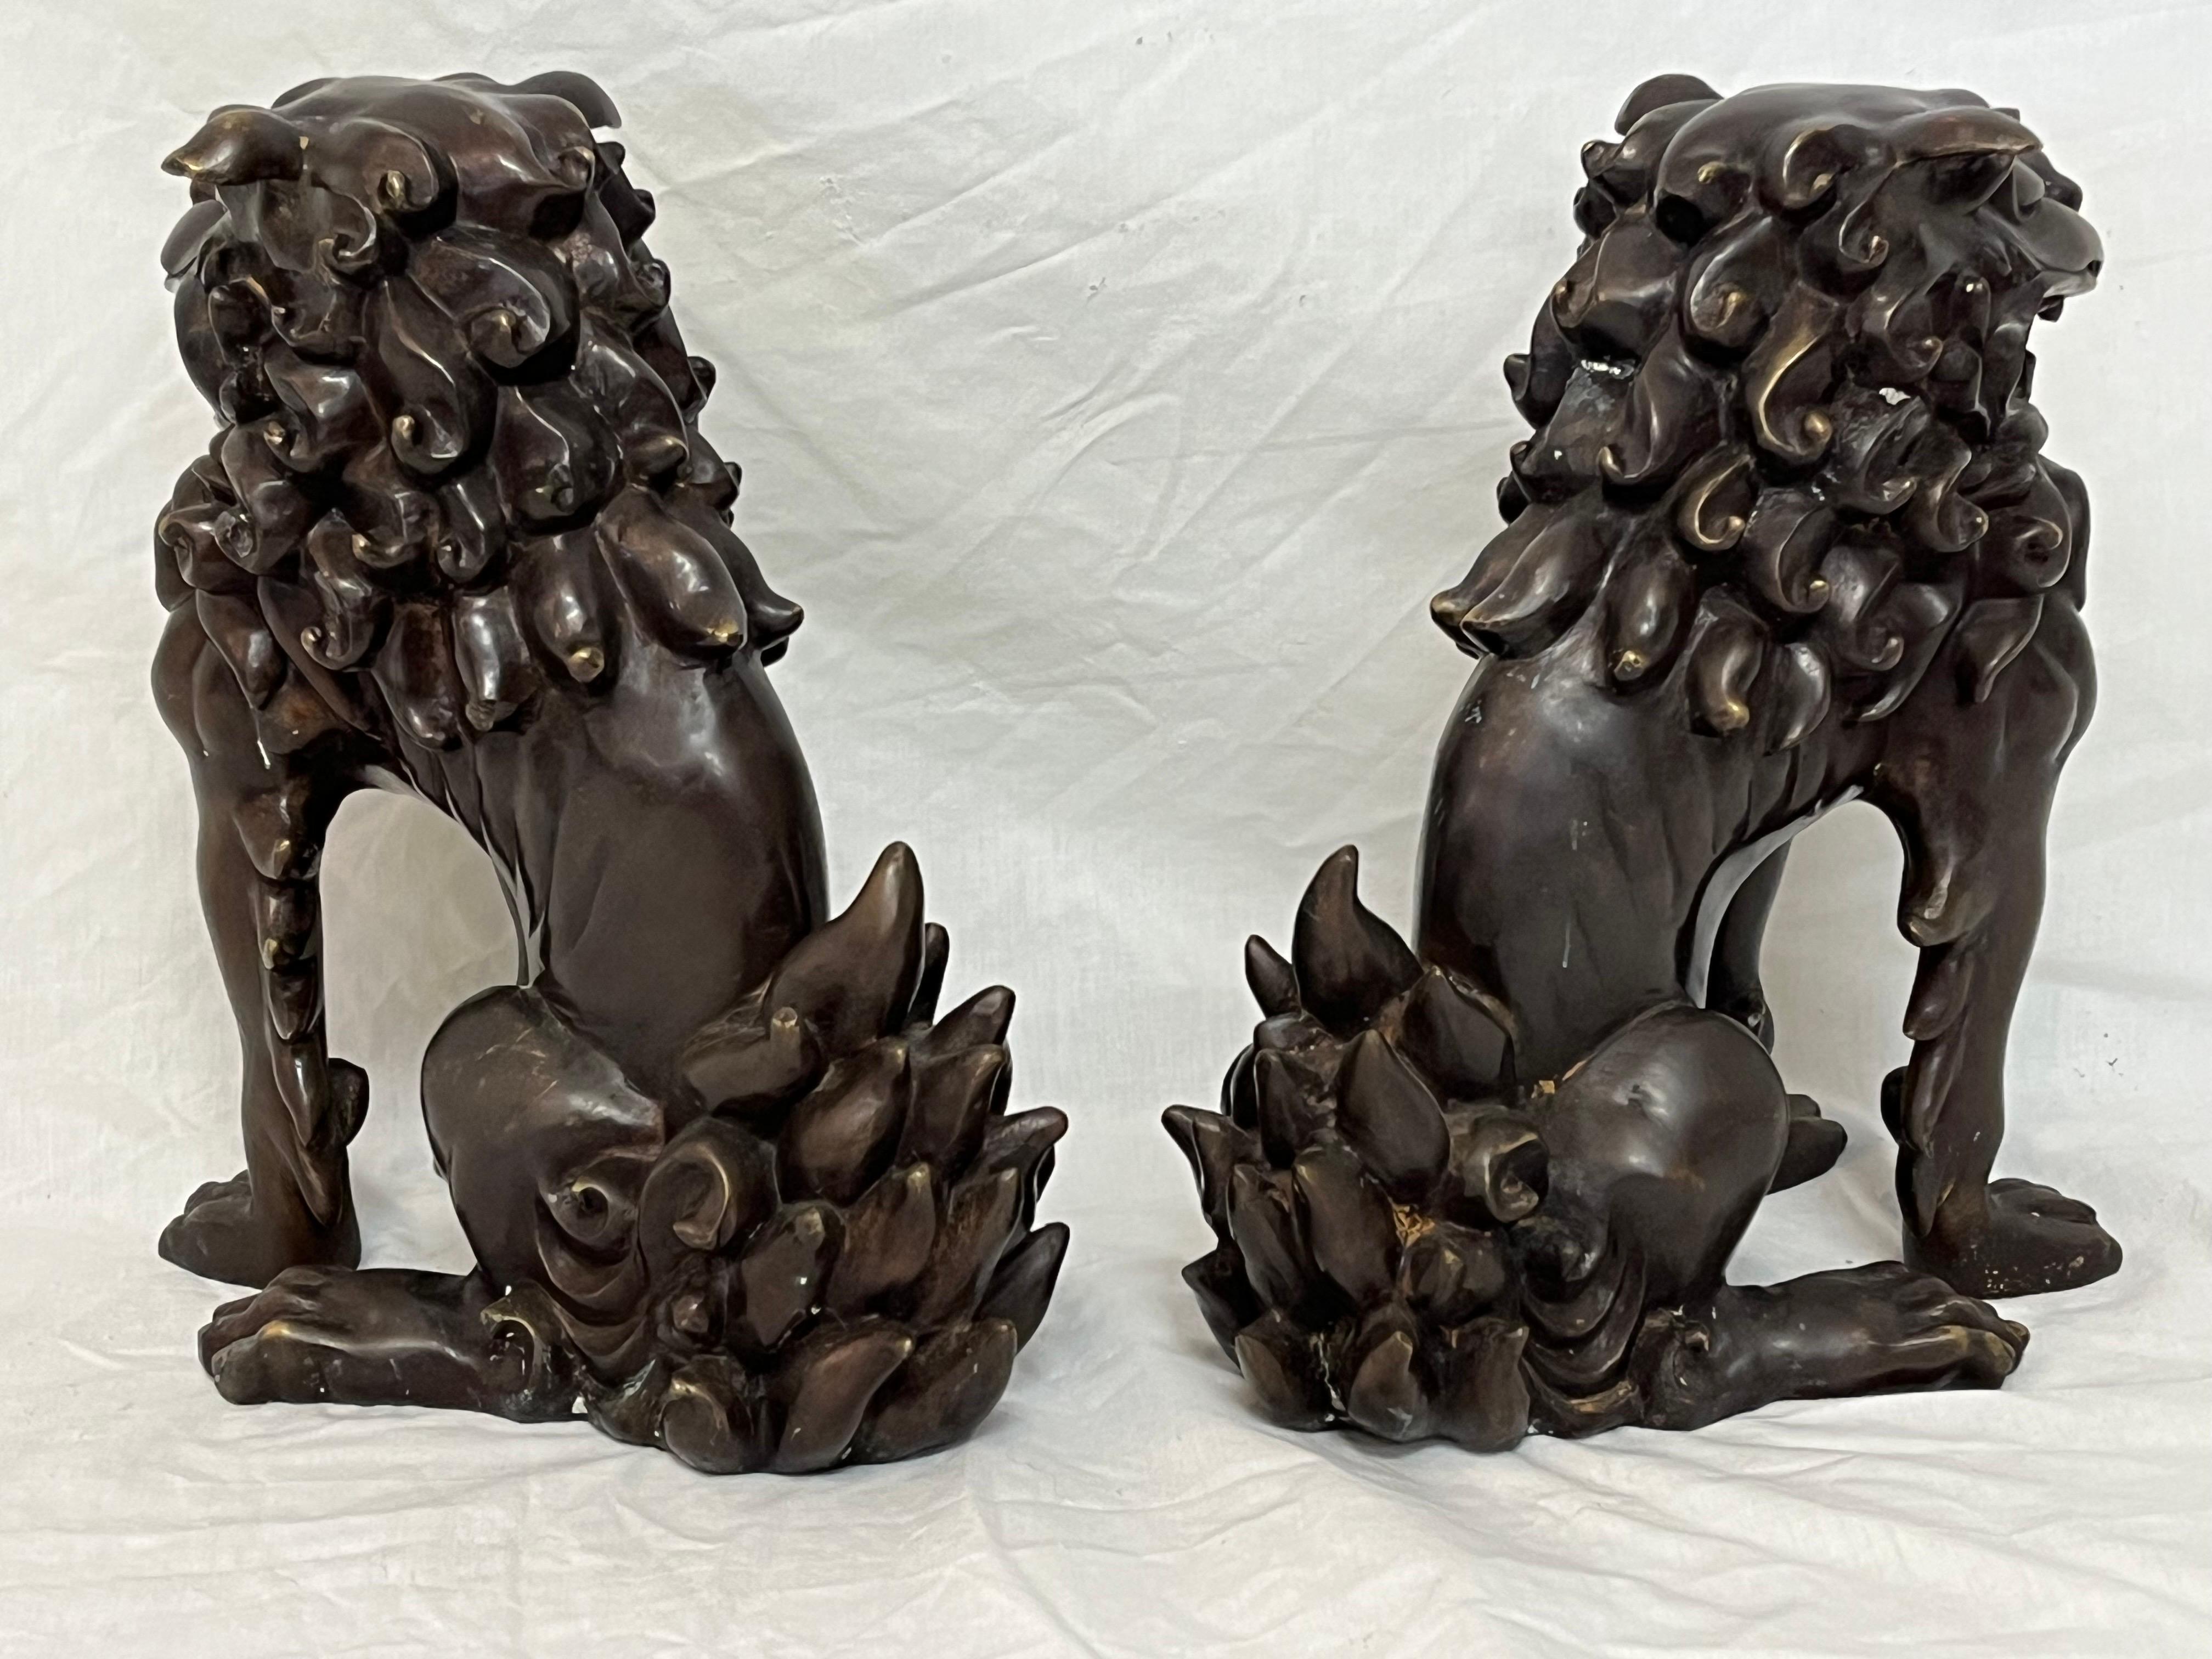 Large Pair of Bronze Lionized Shih Tzus Foo Dogs 20th Century Asian Sculptures In Good Condition For Sale In Atlanta, GA